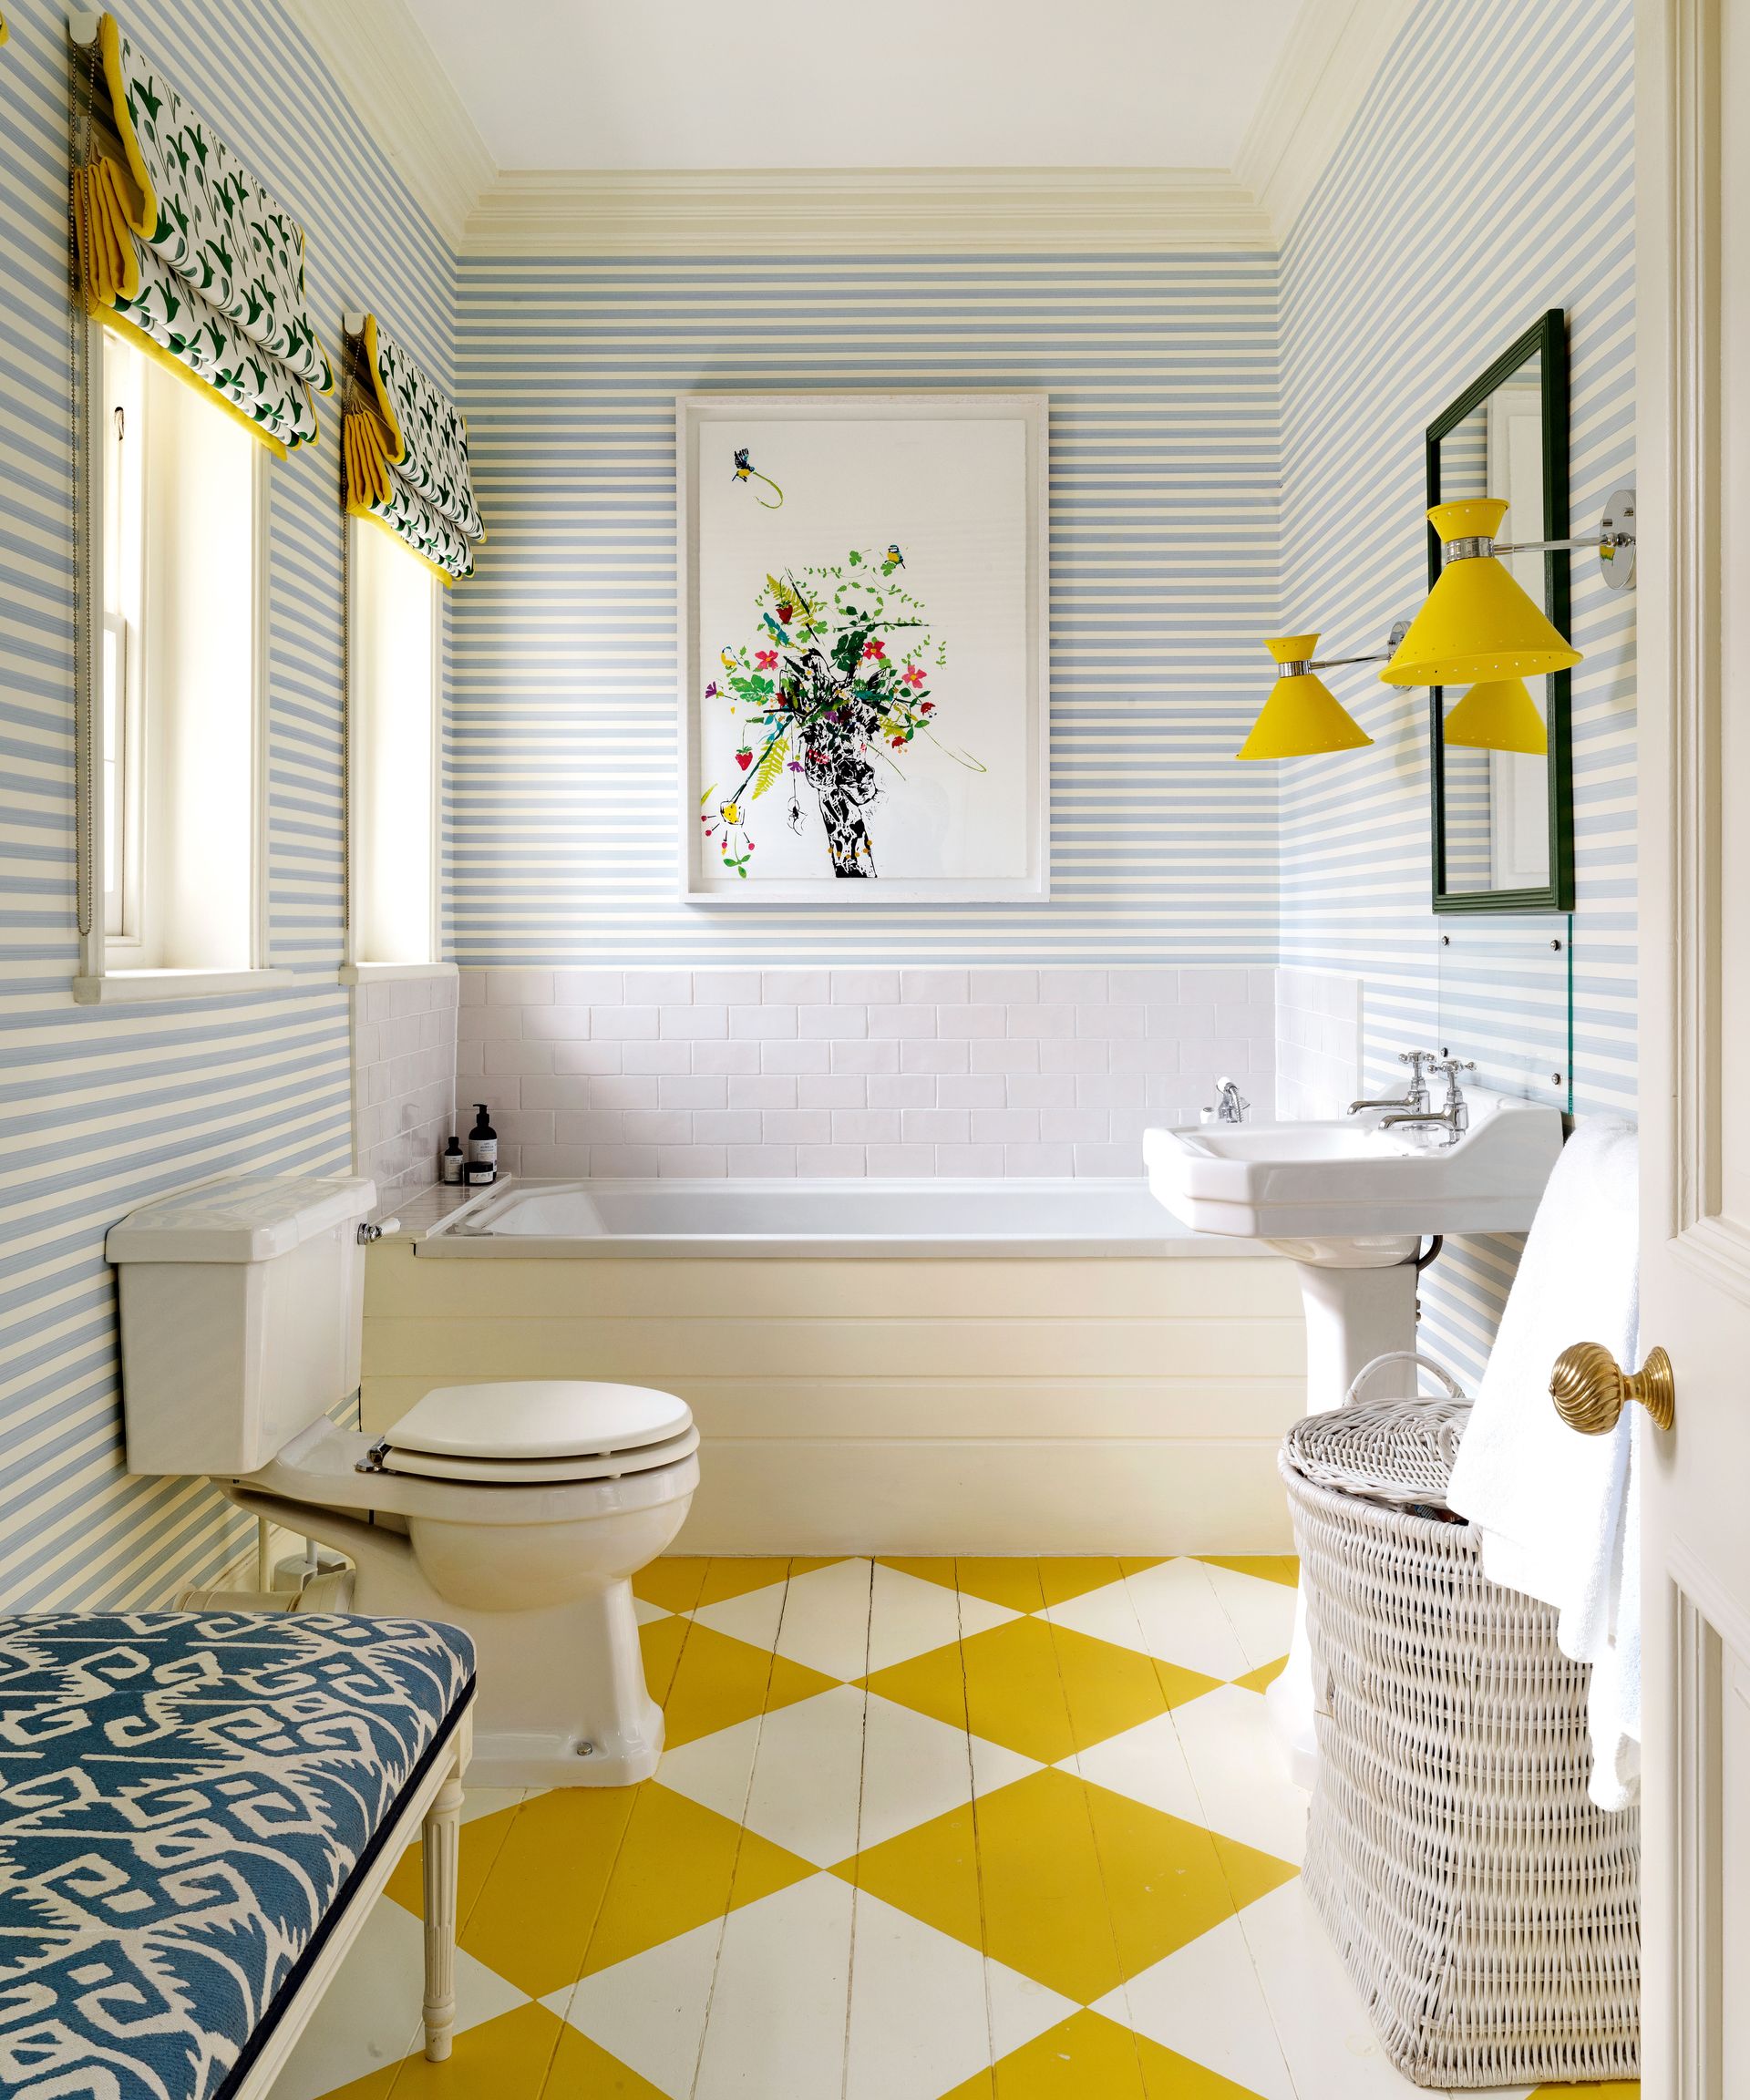 Decorating with yellow: 20 ways to use this sunshine shade